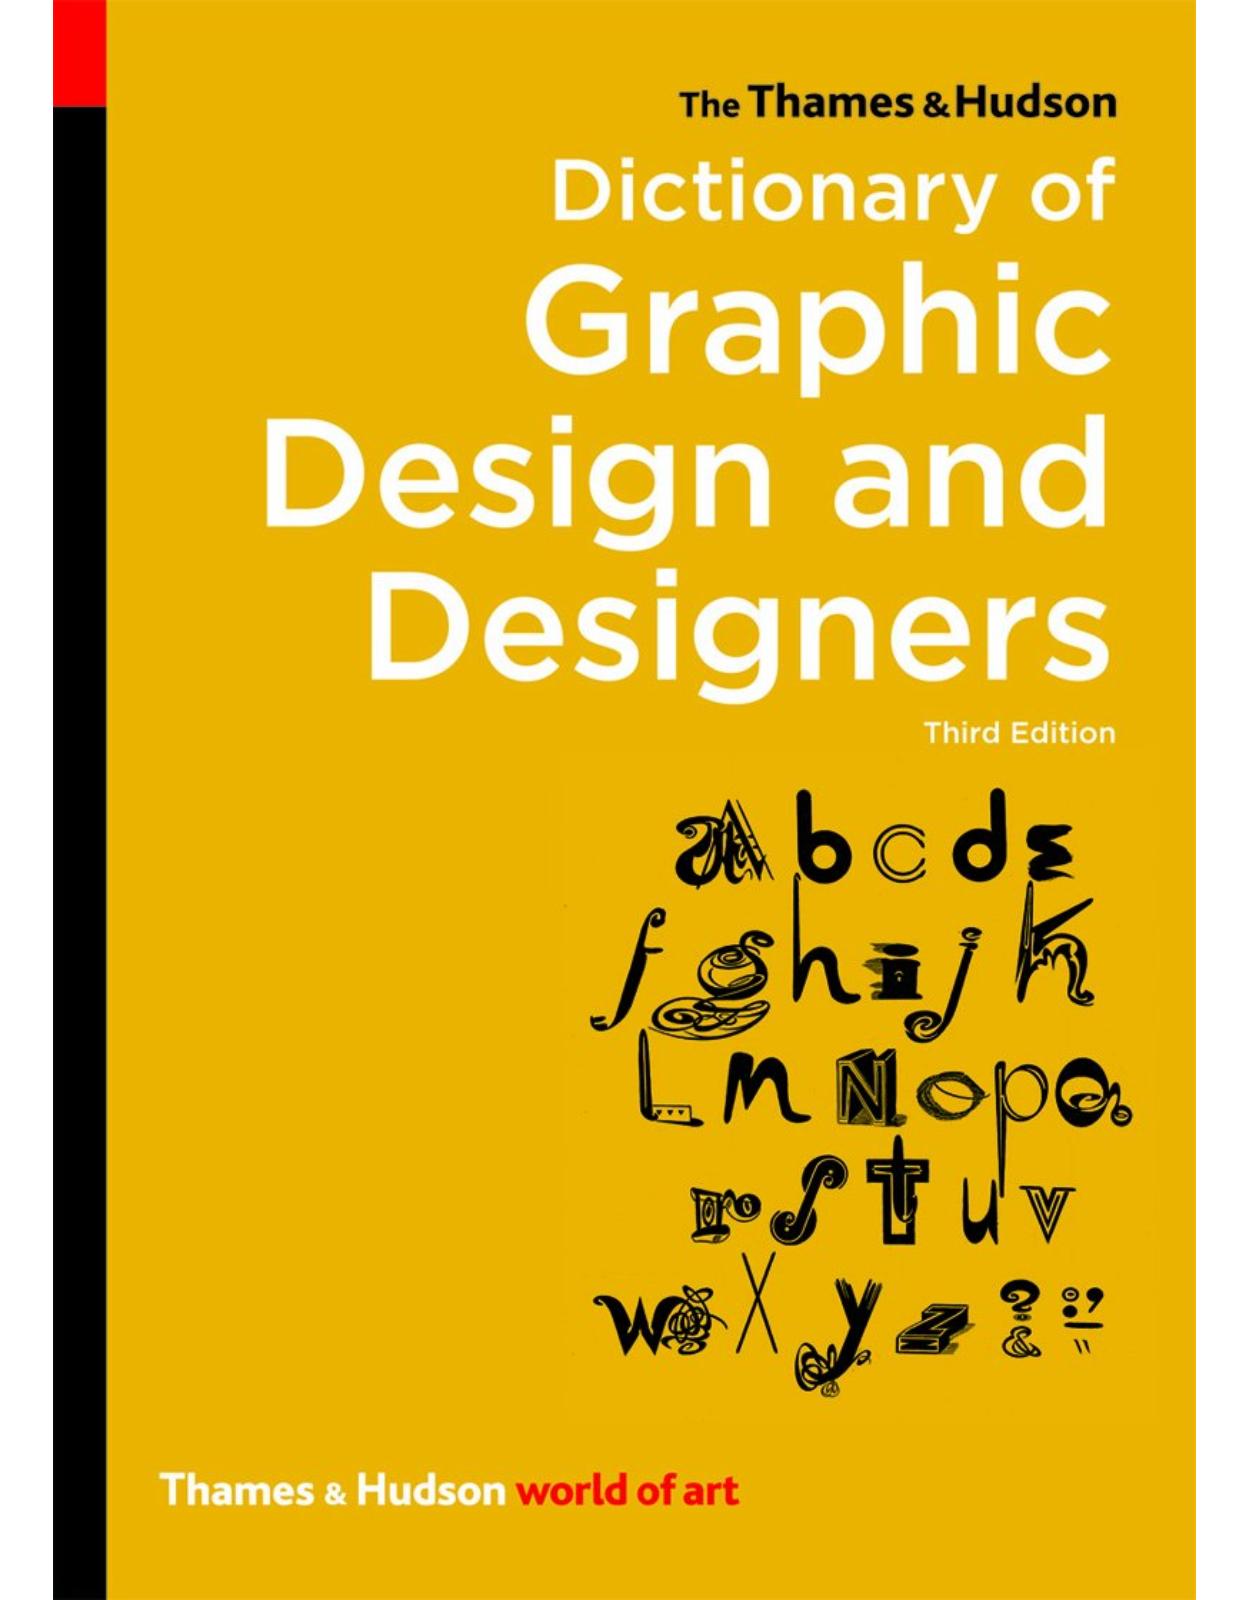 The Thames & Hudson Dictionary of Graphic Design and Designers 